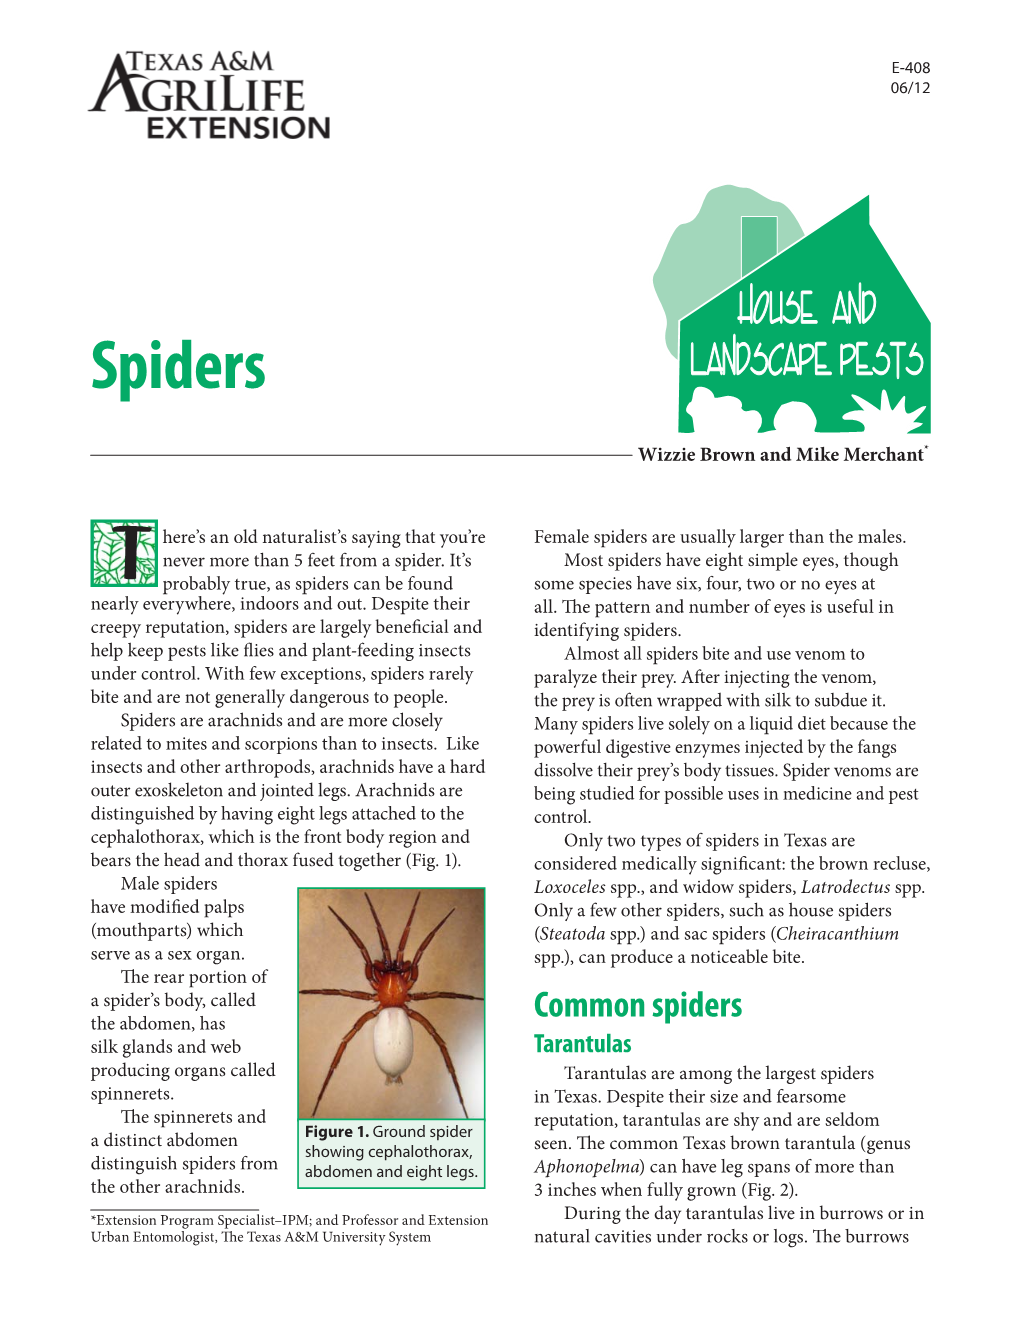 Spiders House and Landscape Pests